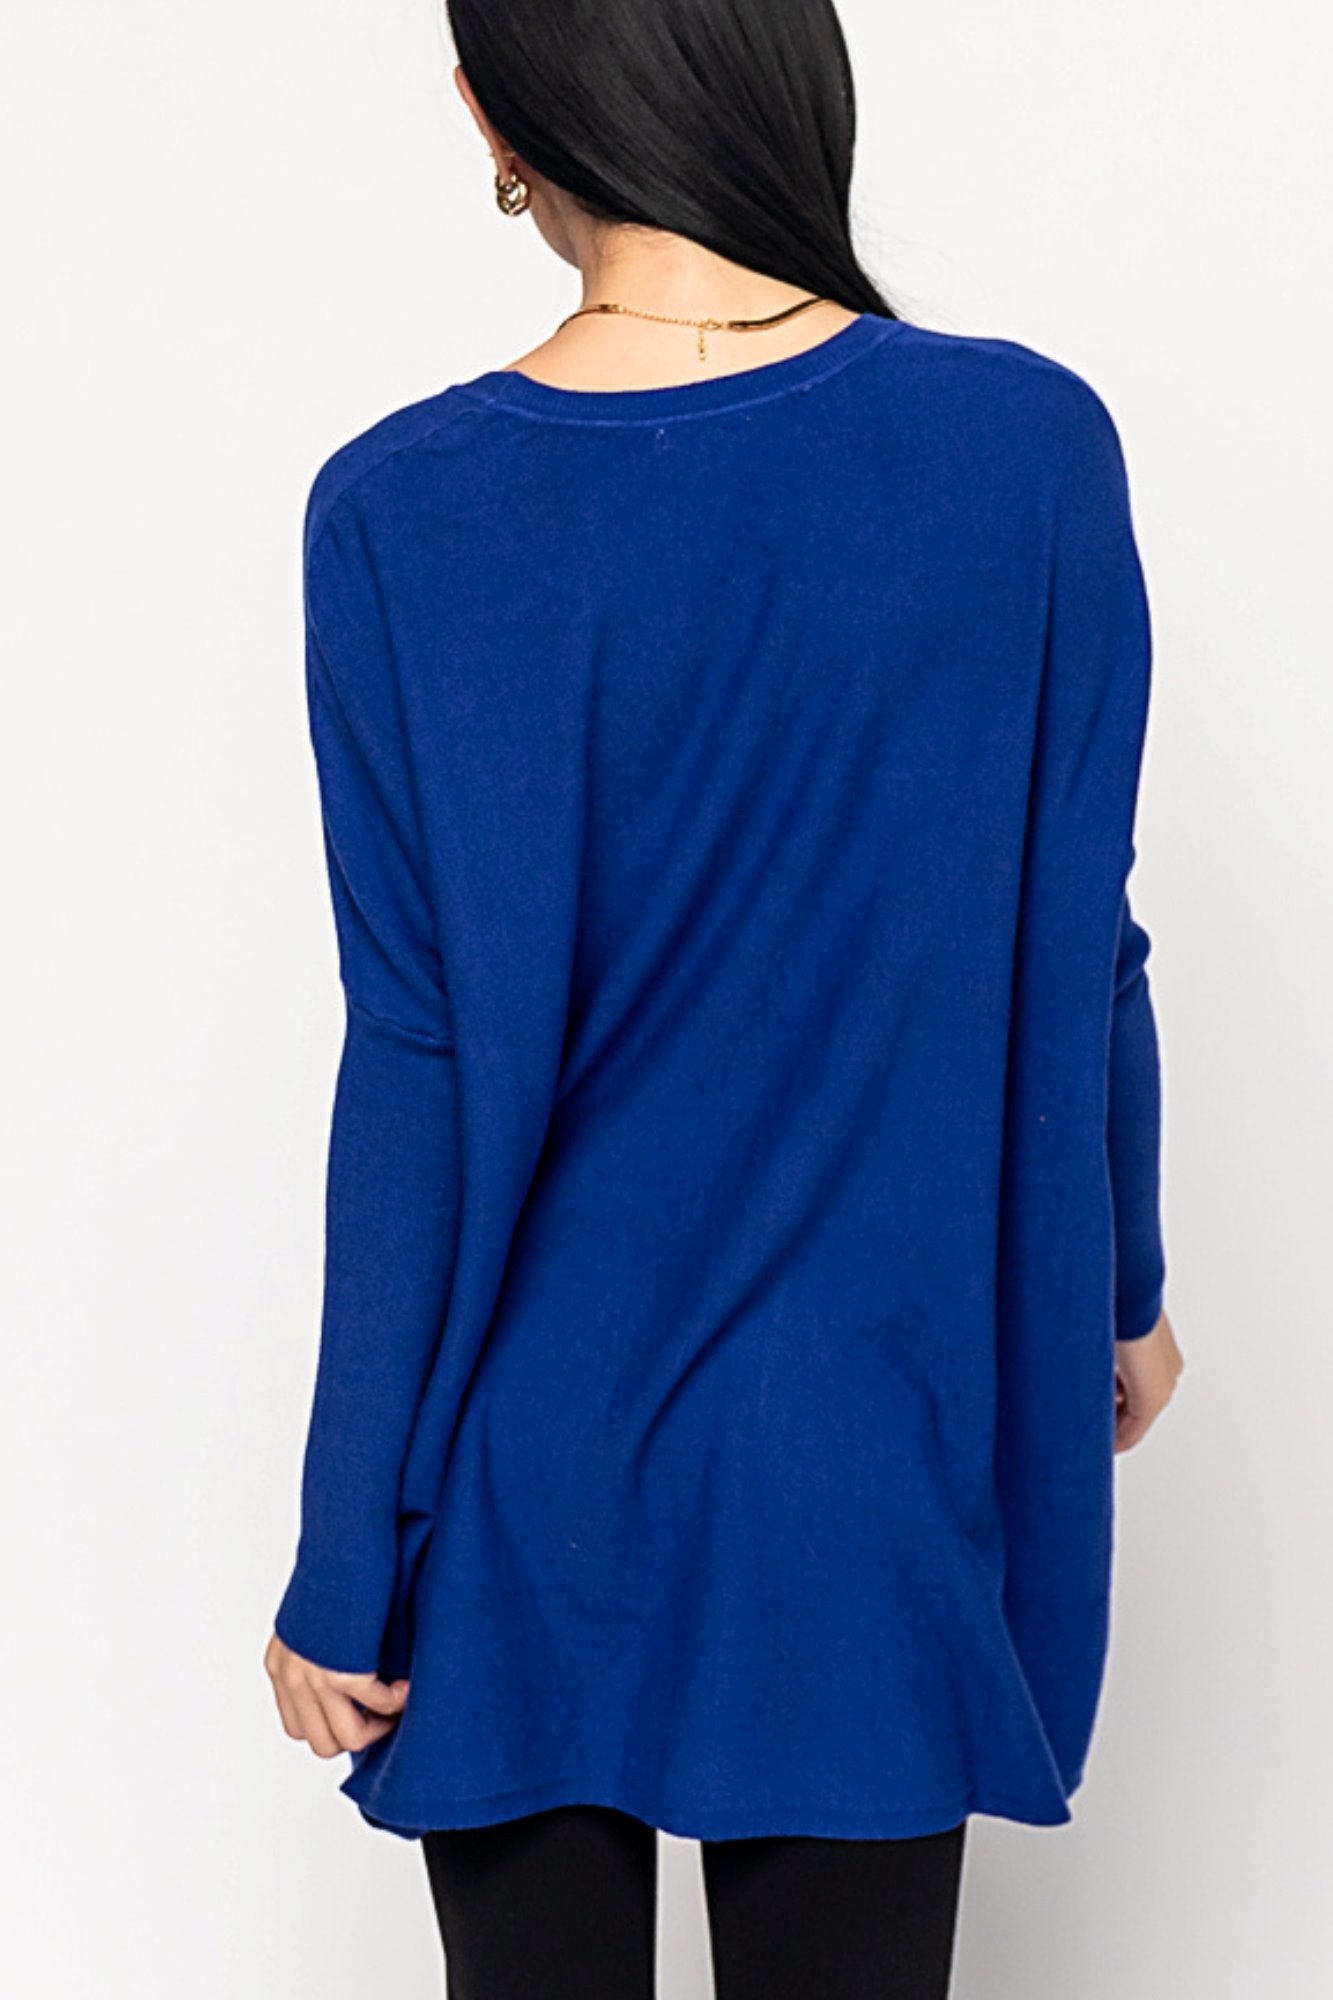 Griffin Sweater in Royal Holley Girl 